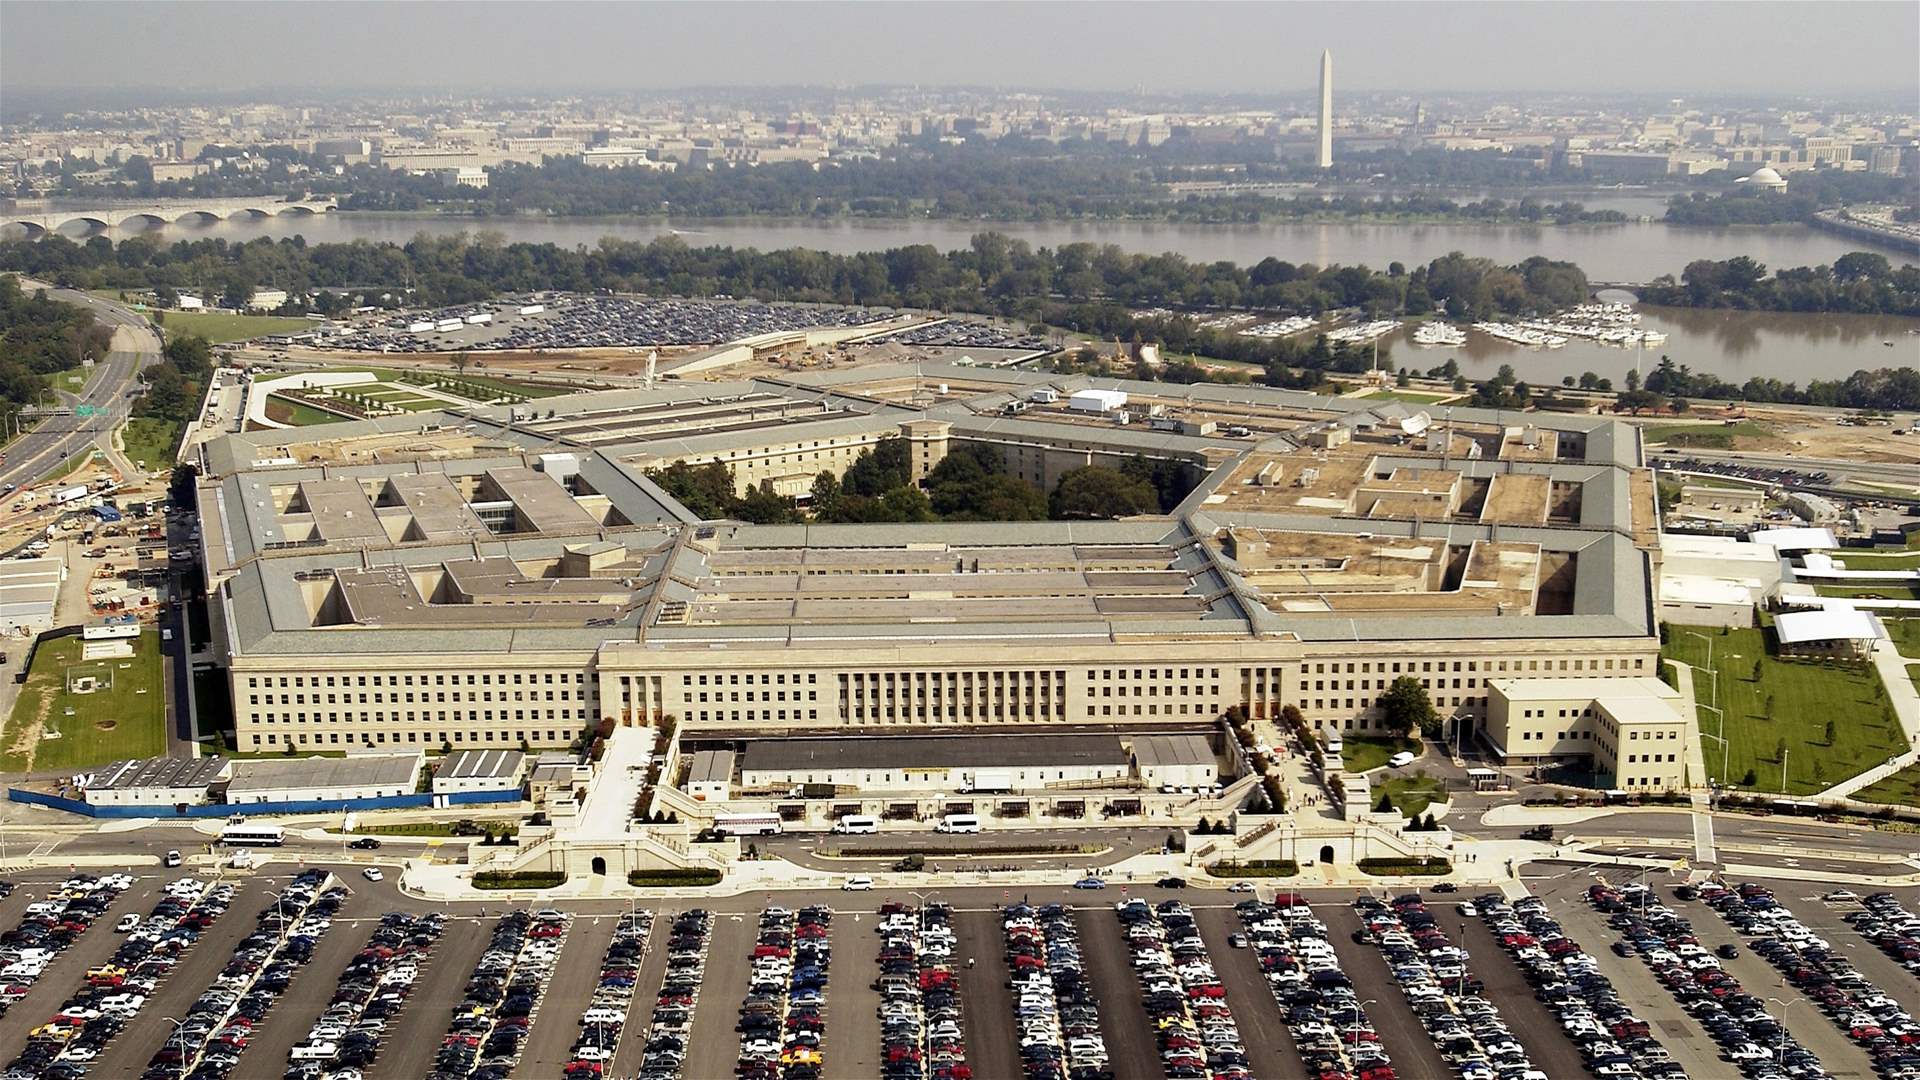 Pentagon: Wagner Group no longer &quot;significantly involved&quot; in the battles in Ukraine